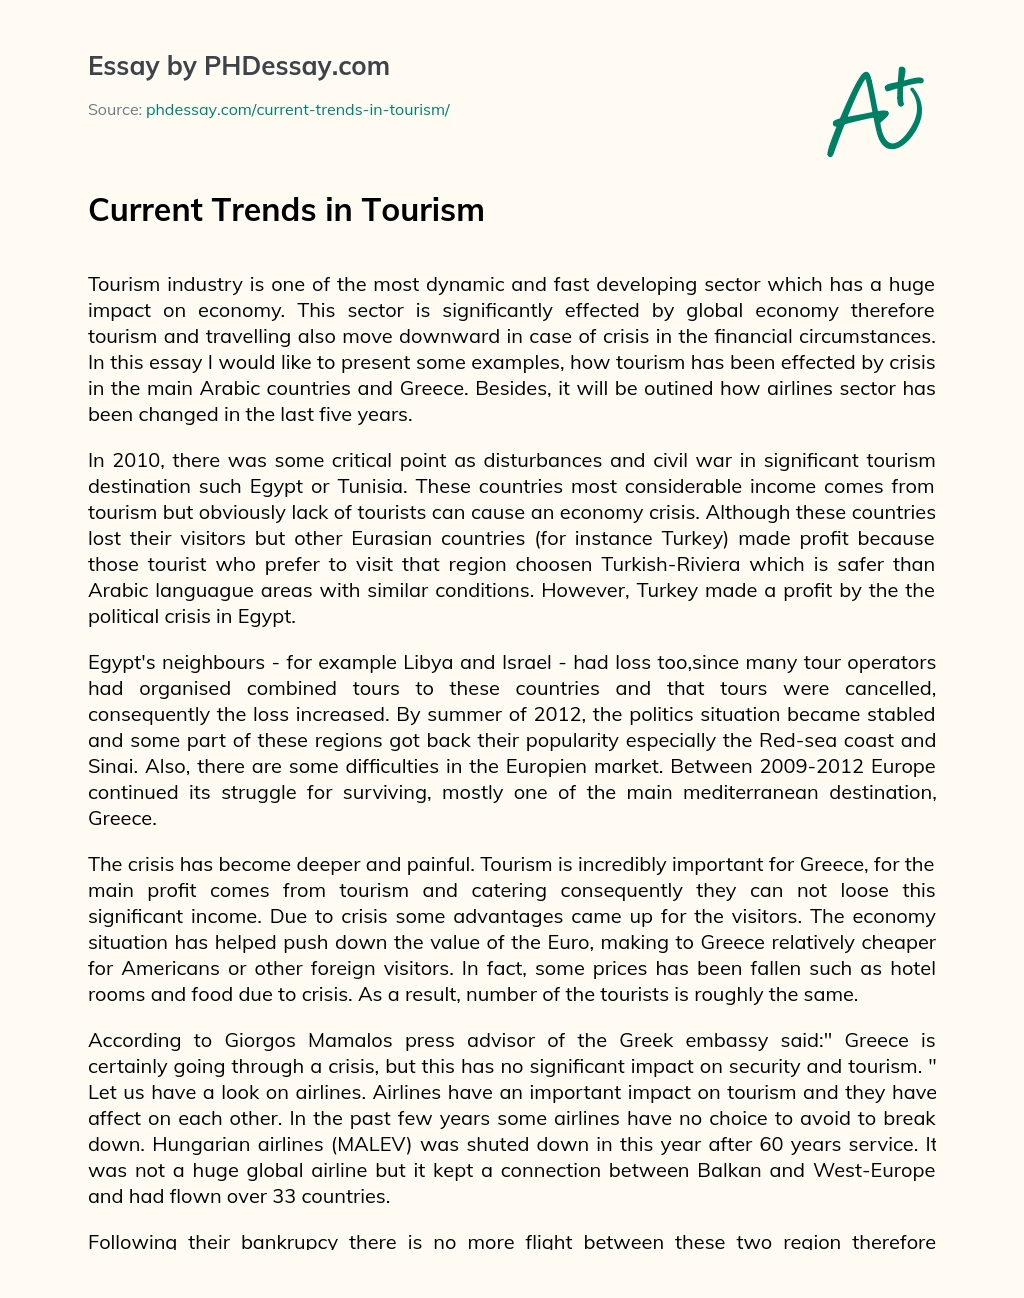 Current Trends in Tourism essay